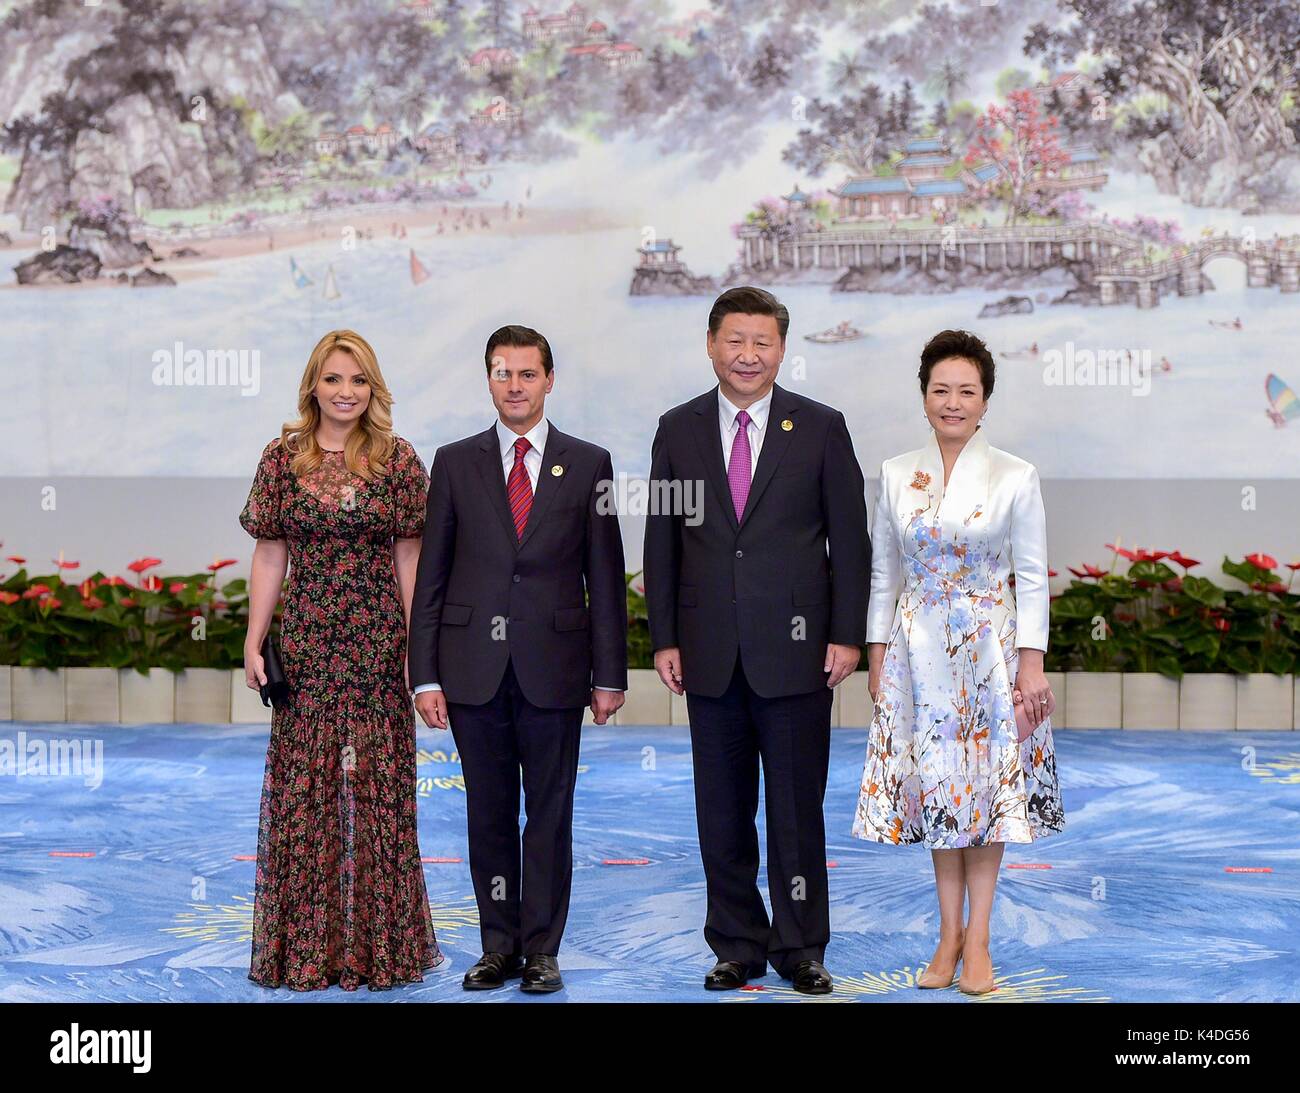 Mexican President Enrique Pena Nieto and his wife Angelica Rivera, right, stand with Chinese President Xi Jinping and his wife Peng Liyuan before the start of the official reception September 5, 2017 in Xiamen, China. Stock Photo